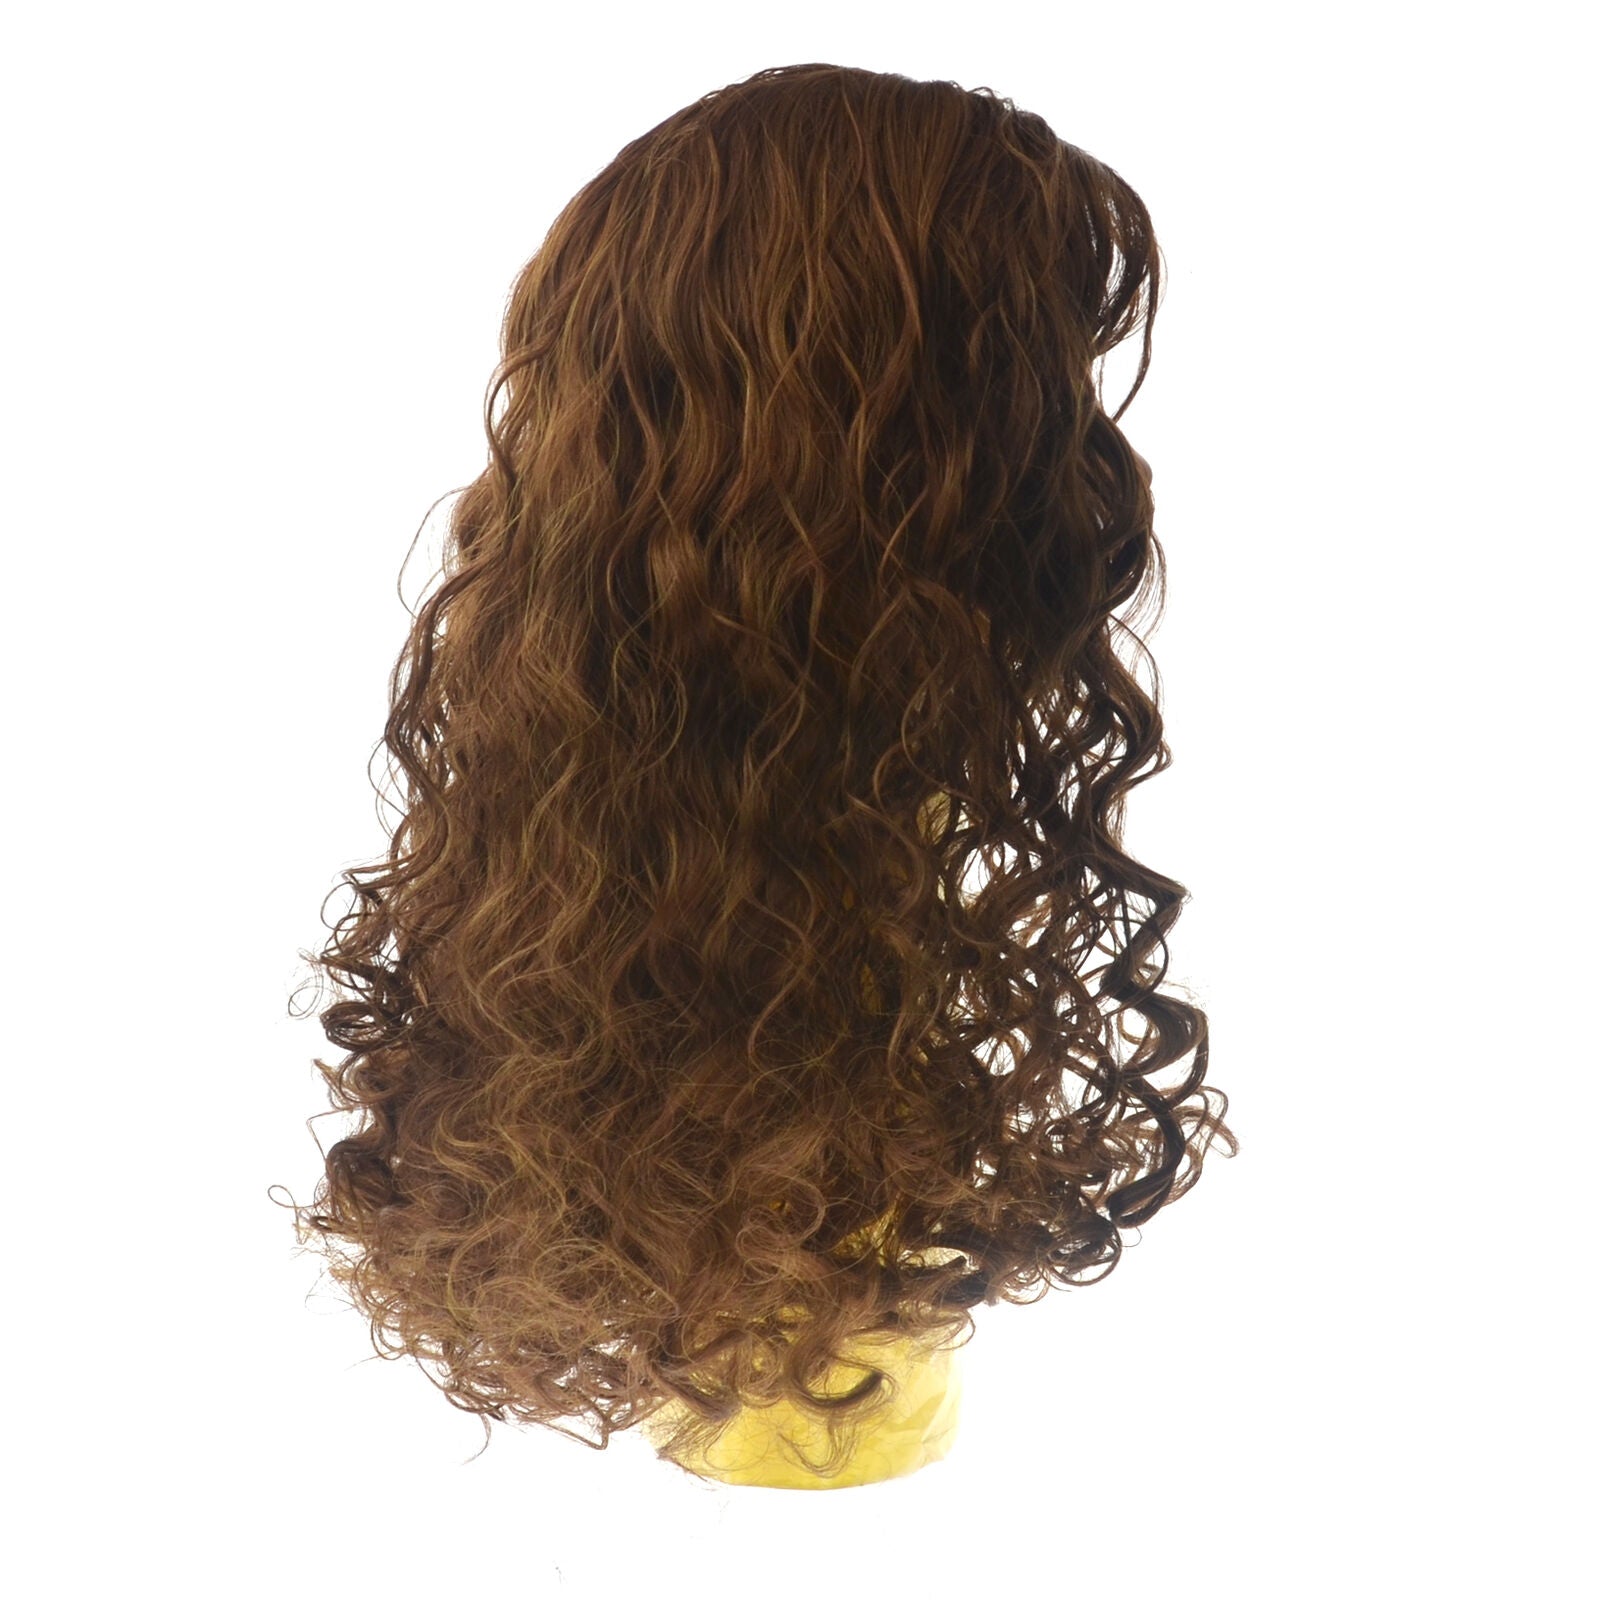 Women's Long Curly Hair Full Wig Heat Resistant Synthetic Hair Brown Wigs Ombre